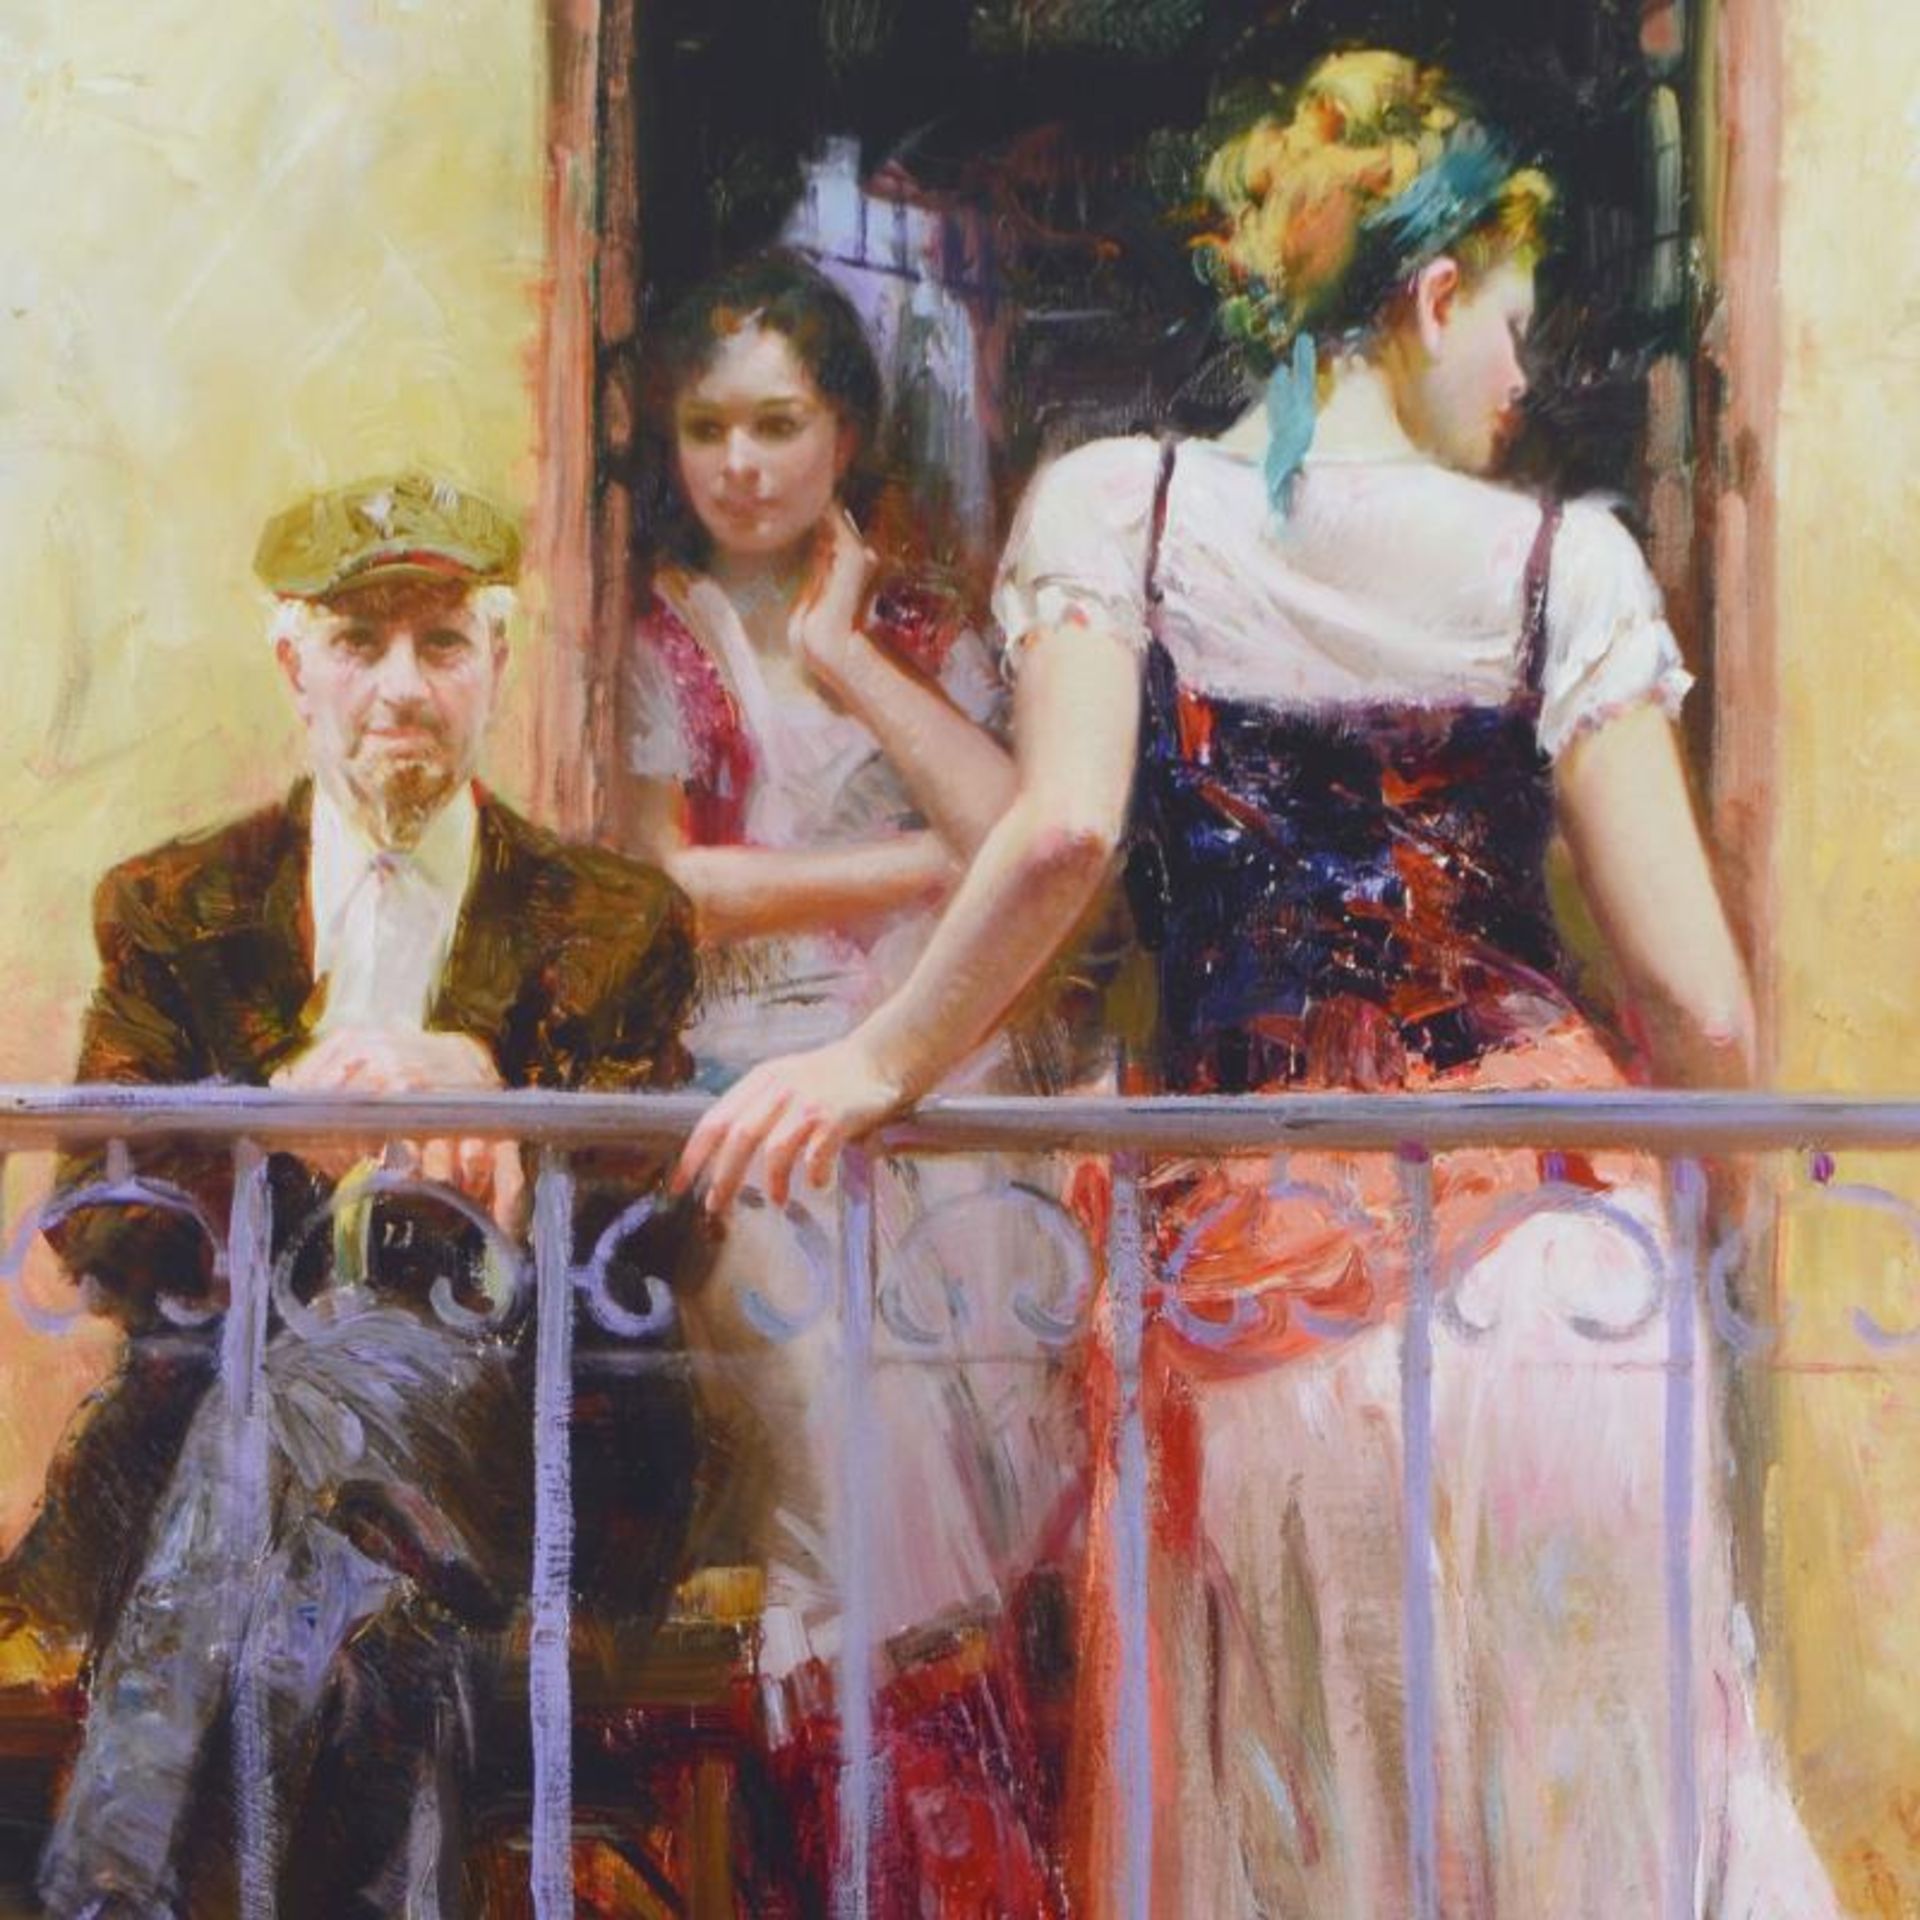 Pino (1939-2010), "Family Time" Limited Edition Artist-Embellished Giclee on Can - Image 2 of 3